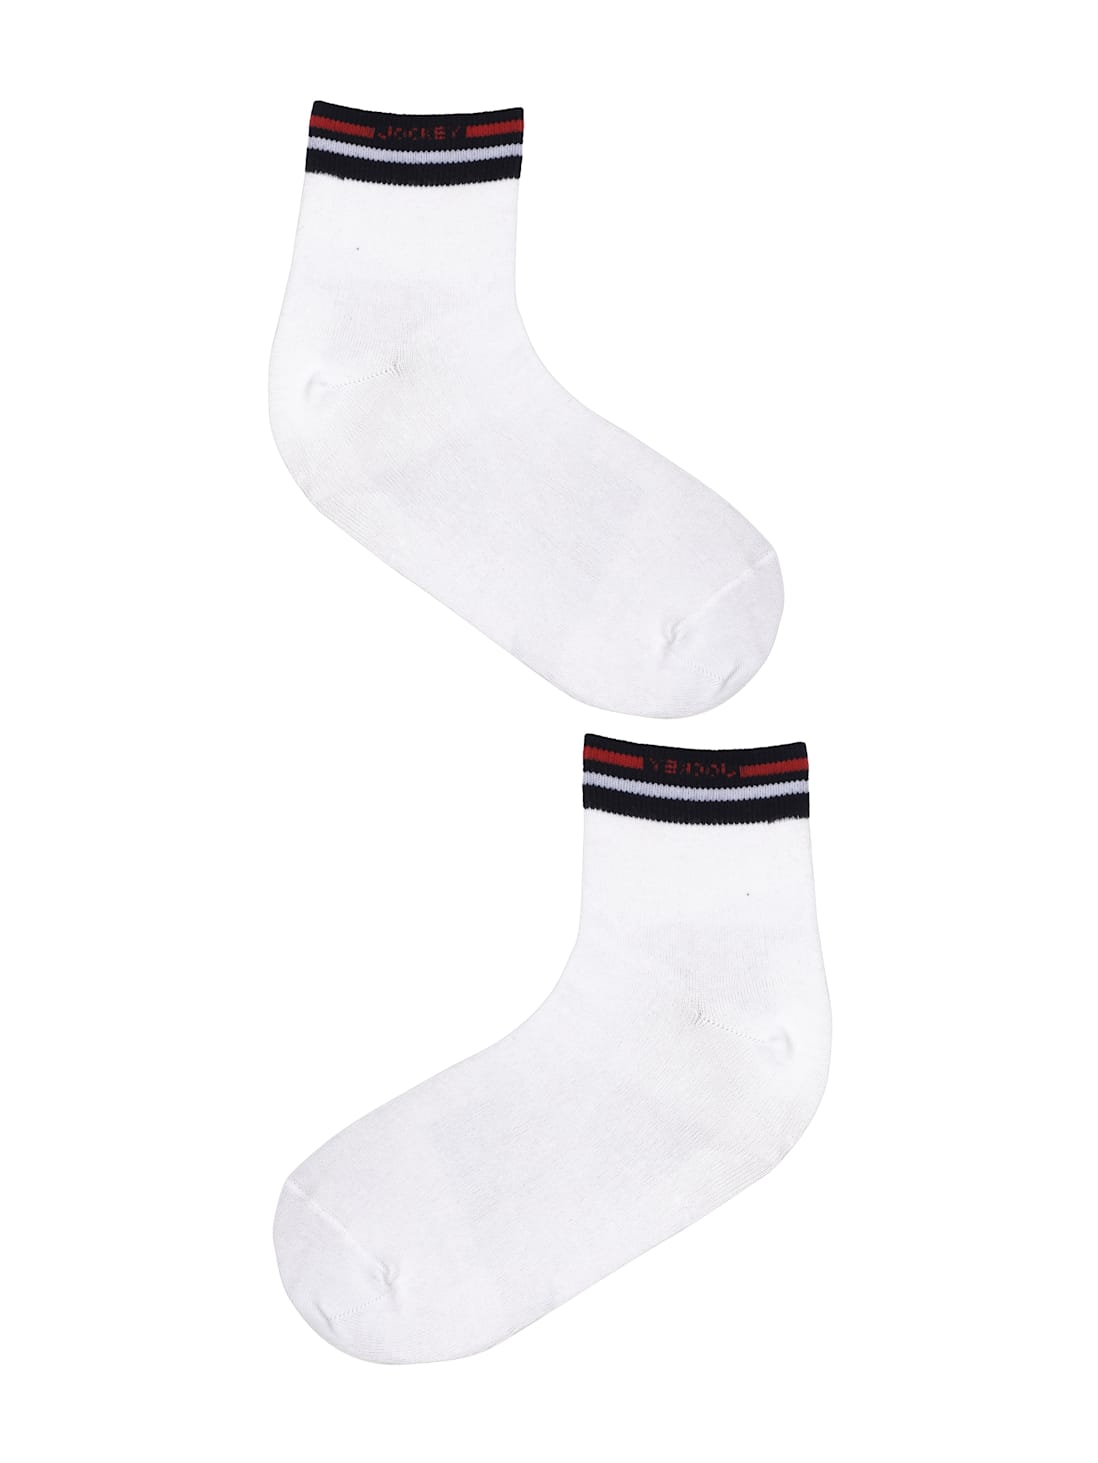 Buy Men's Compact Cotton Stretch Ankle Length Socks with Stay Fresh ...